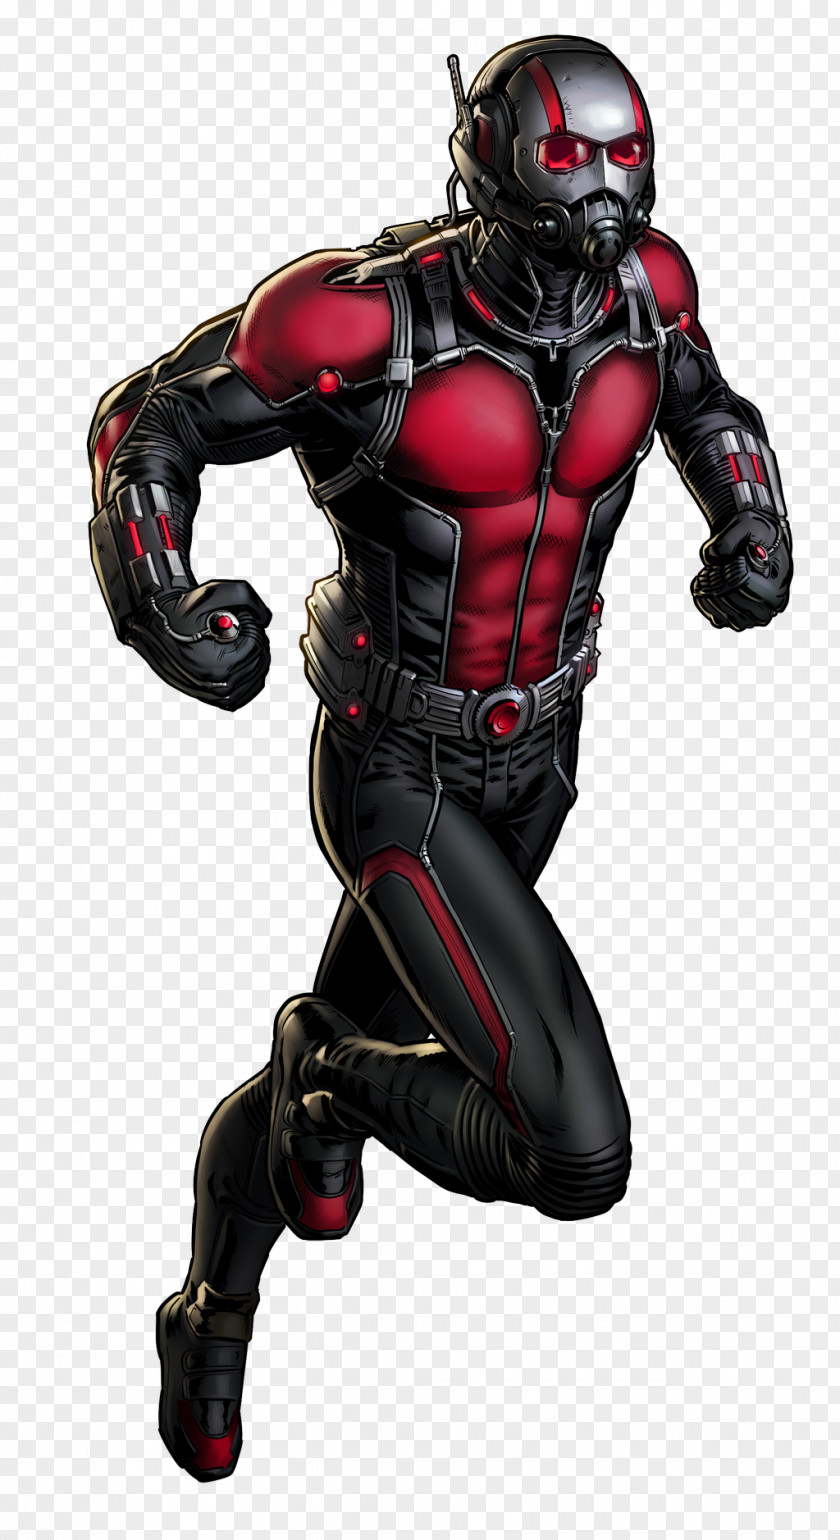 Ant Man Ant-Man Marvel: Avengers Alliance Hank Pym Wasp Spider-Man PNG